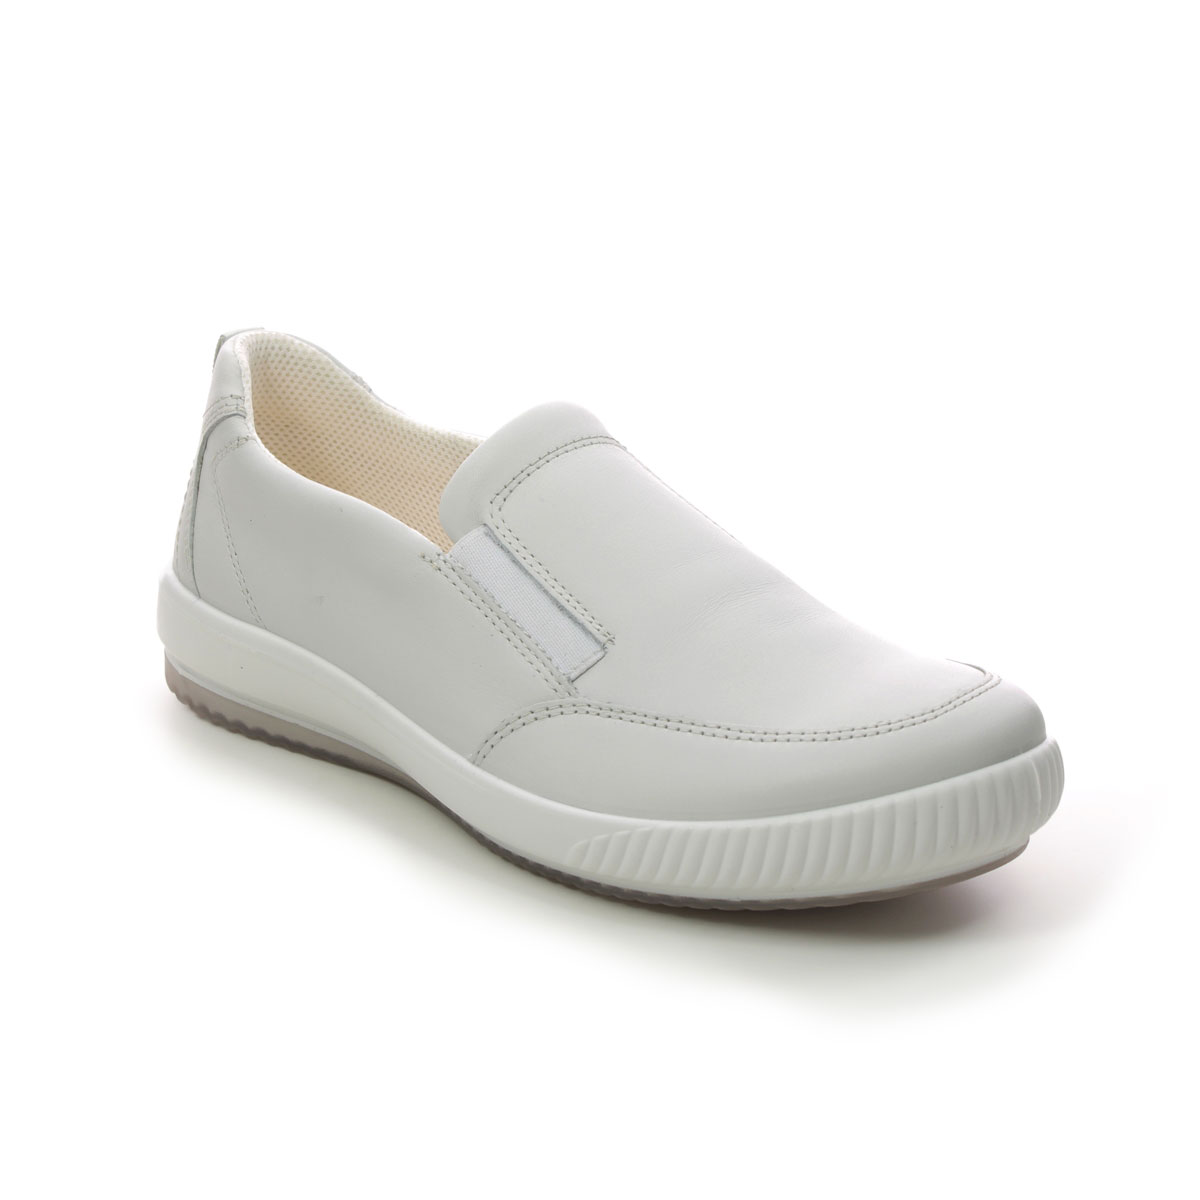 Legero Tanaro 5 Slip WHITE LEATHER Womens Comfort Slip On Shoes 2000215-1000 in a Plain Leather in Size 6.5